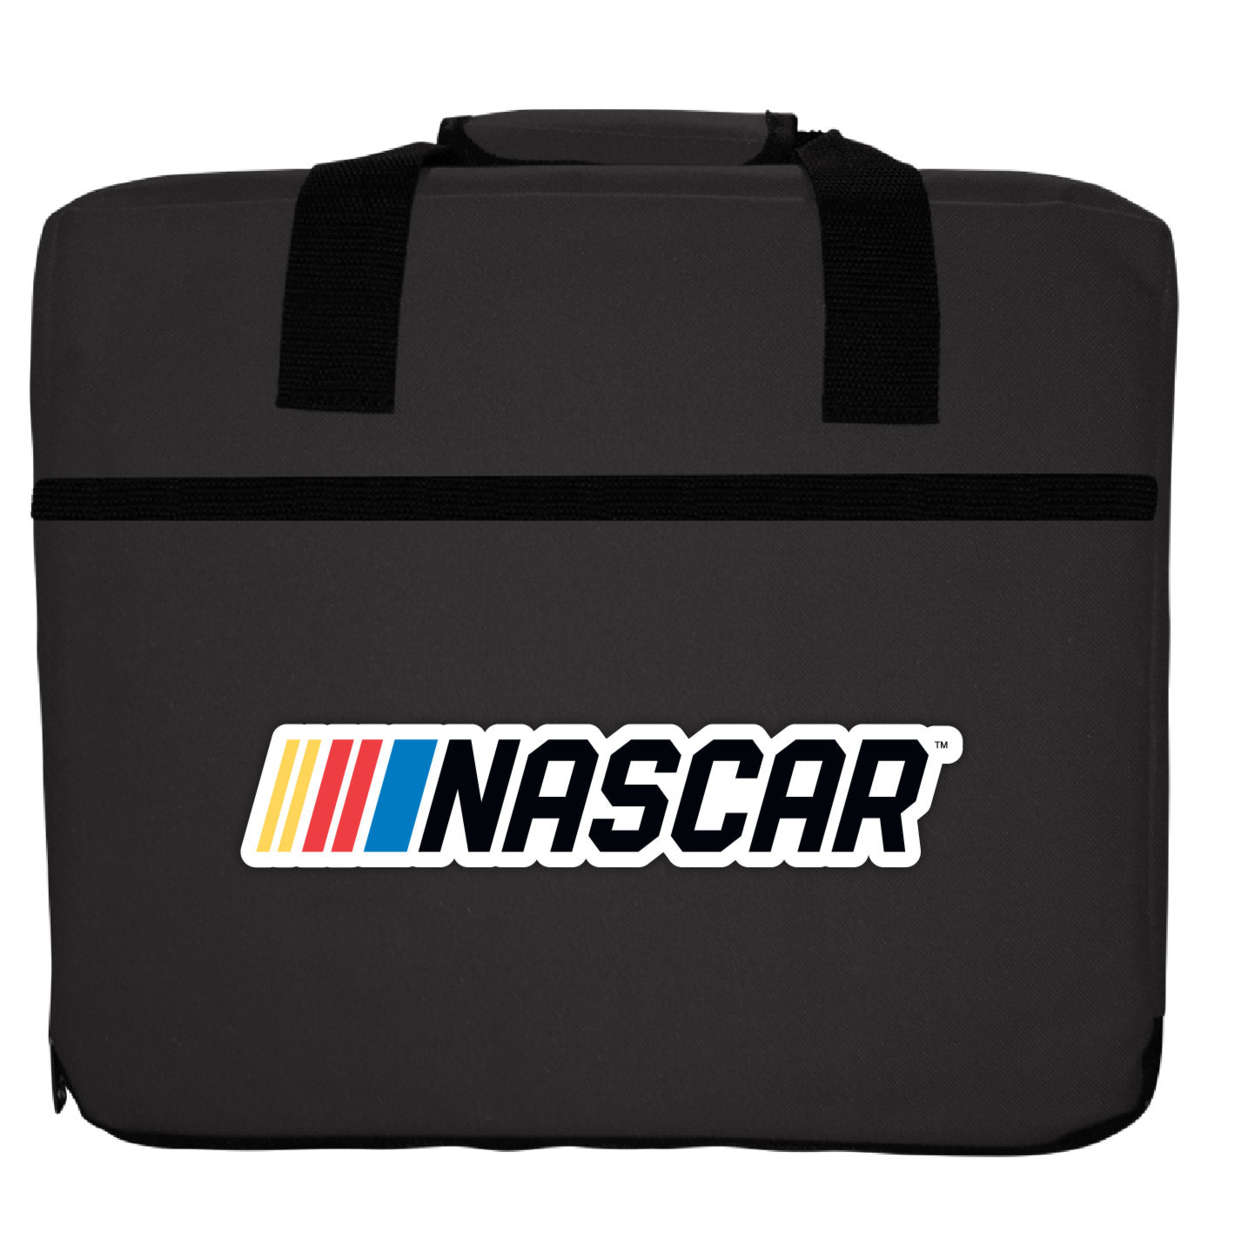 NASCAR Officially Licensed Deluxe Seat Cushion